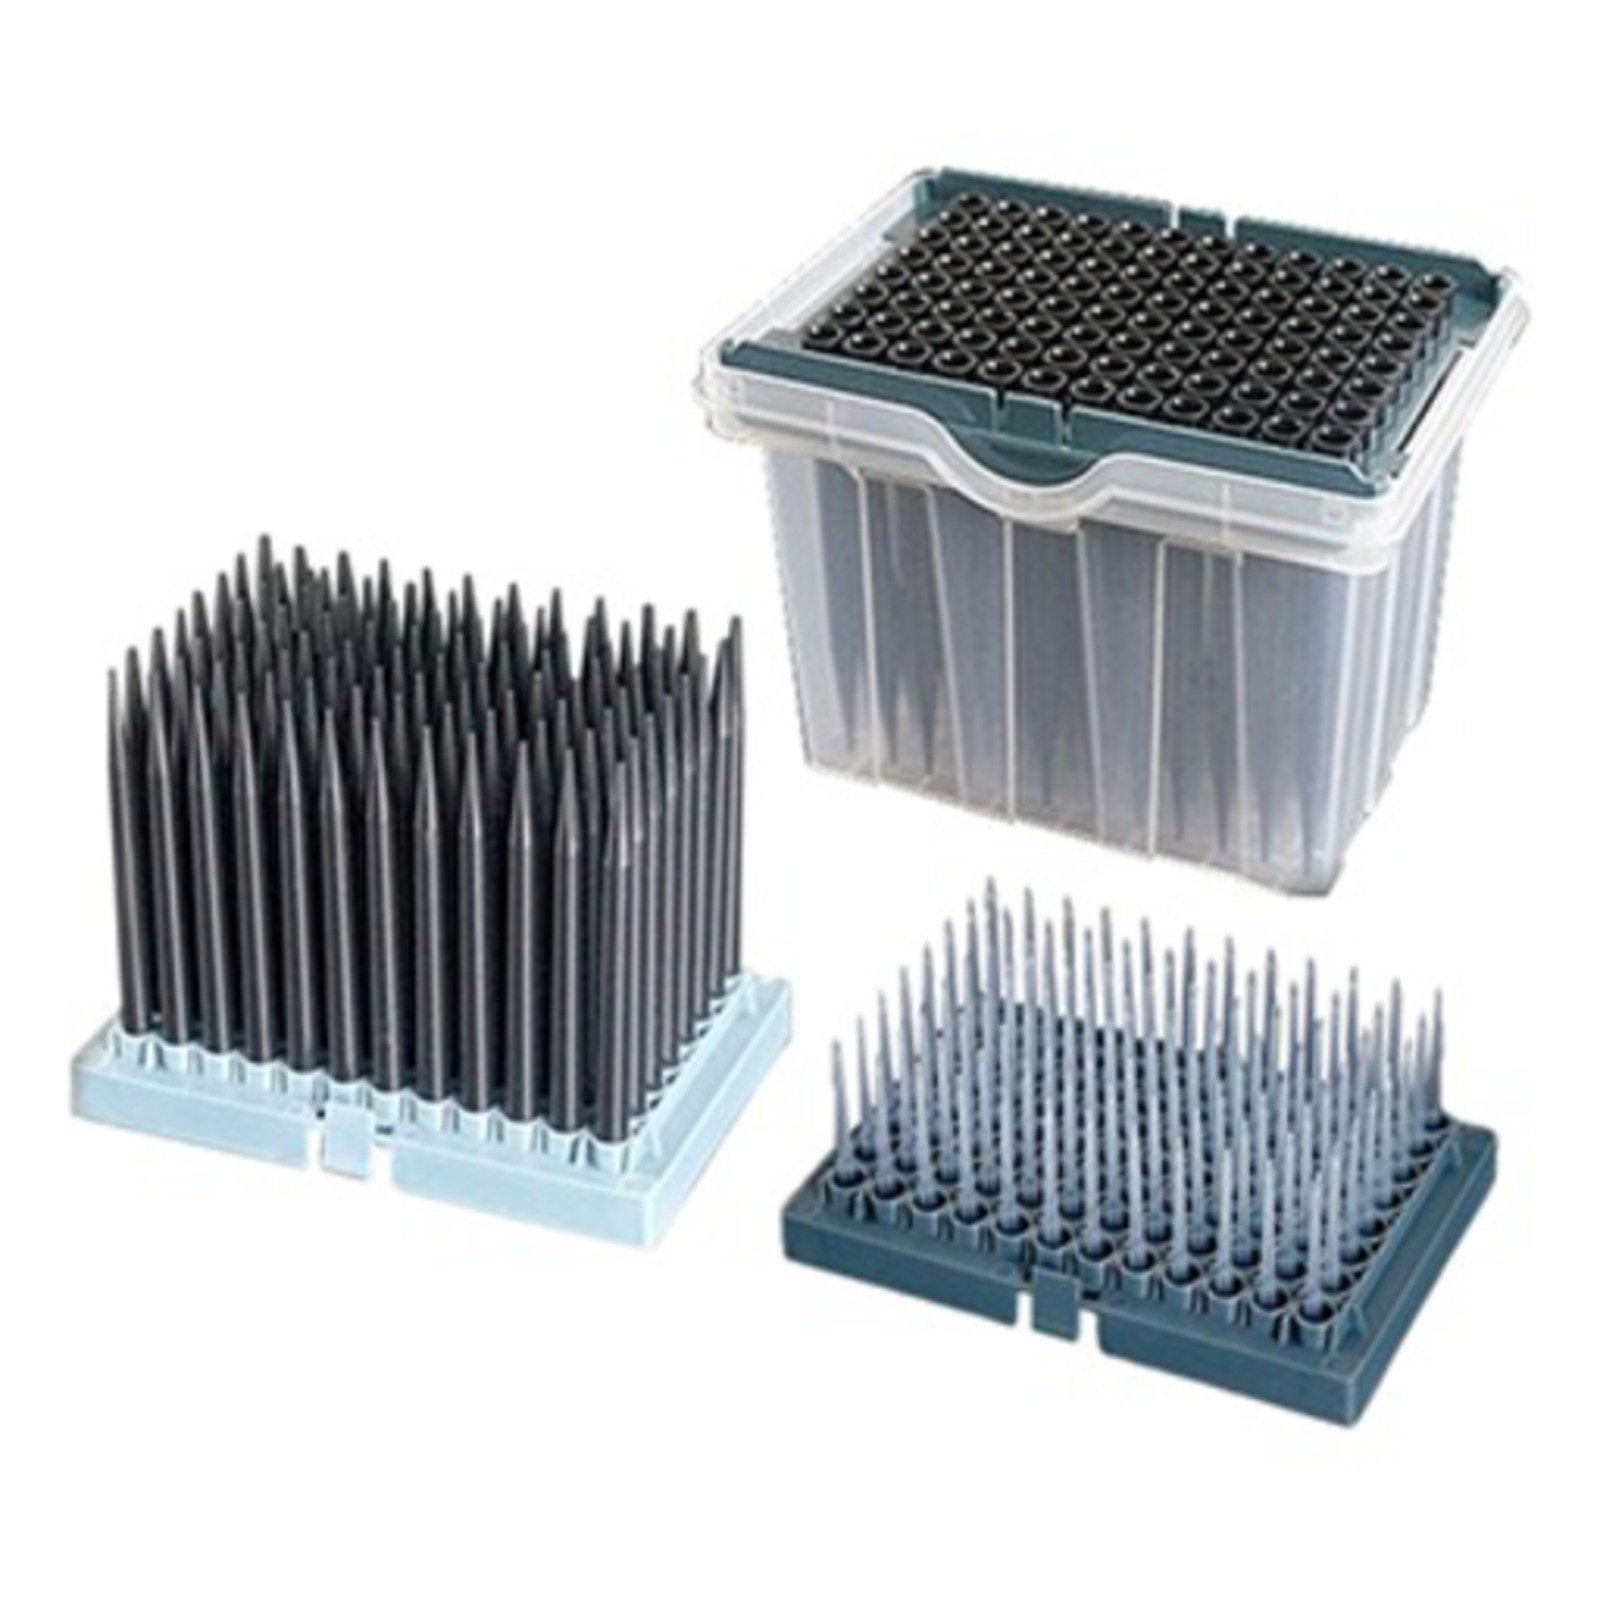 Robotic Sterile Filtered Pipette Tips; Tecan Type, 50uL, Non-Conductive (Pack of 24 Racks x 96 Tips)